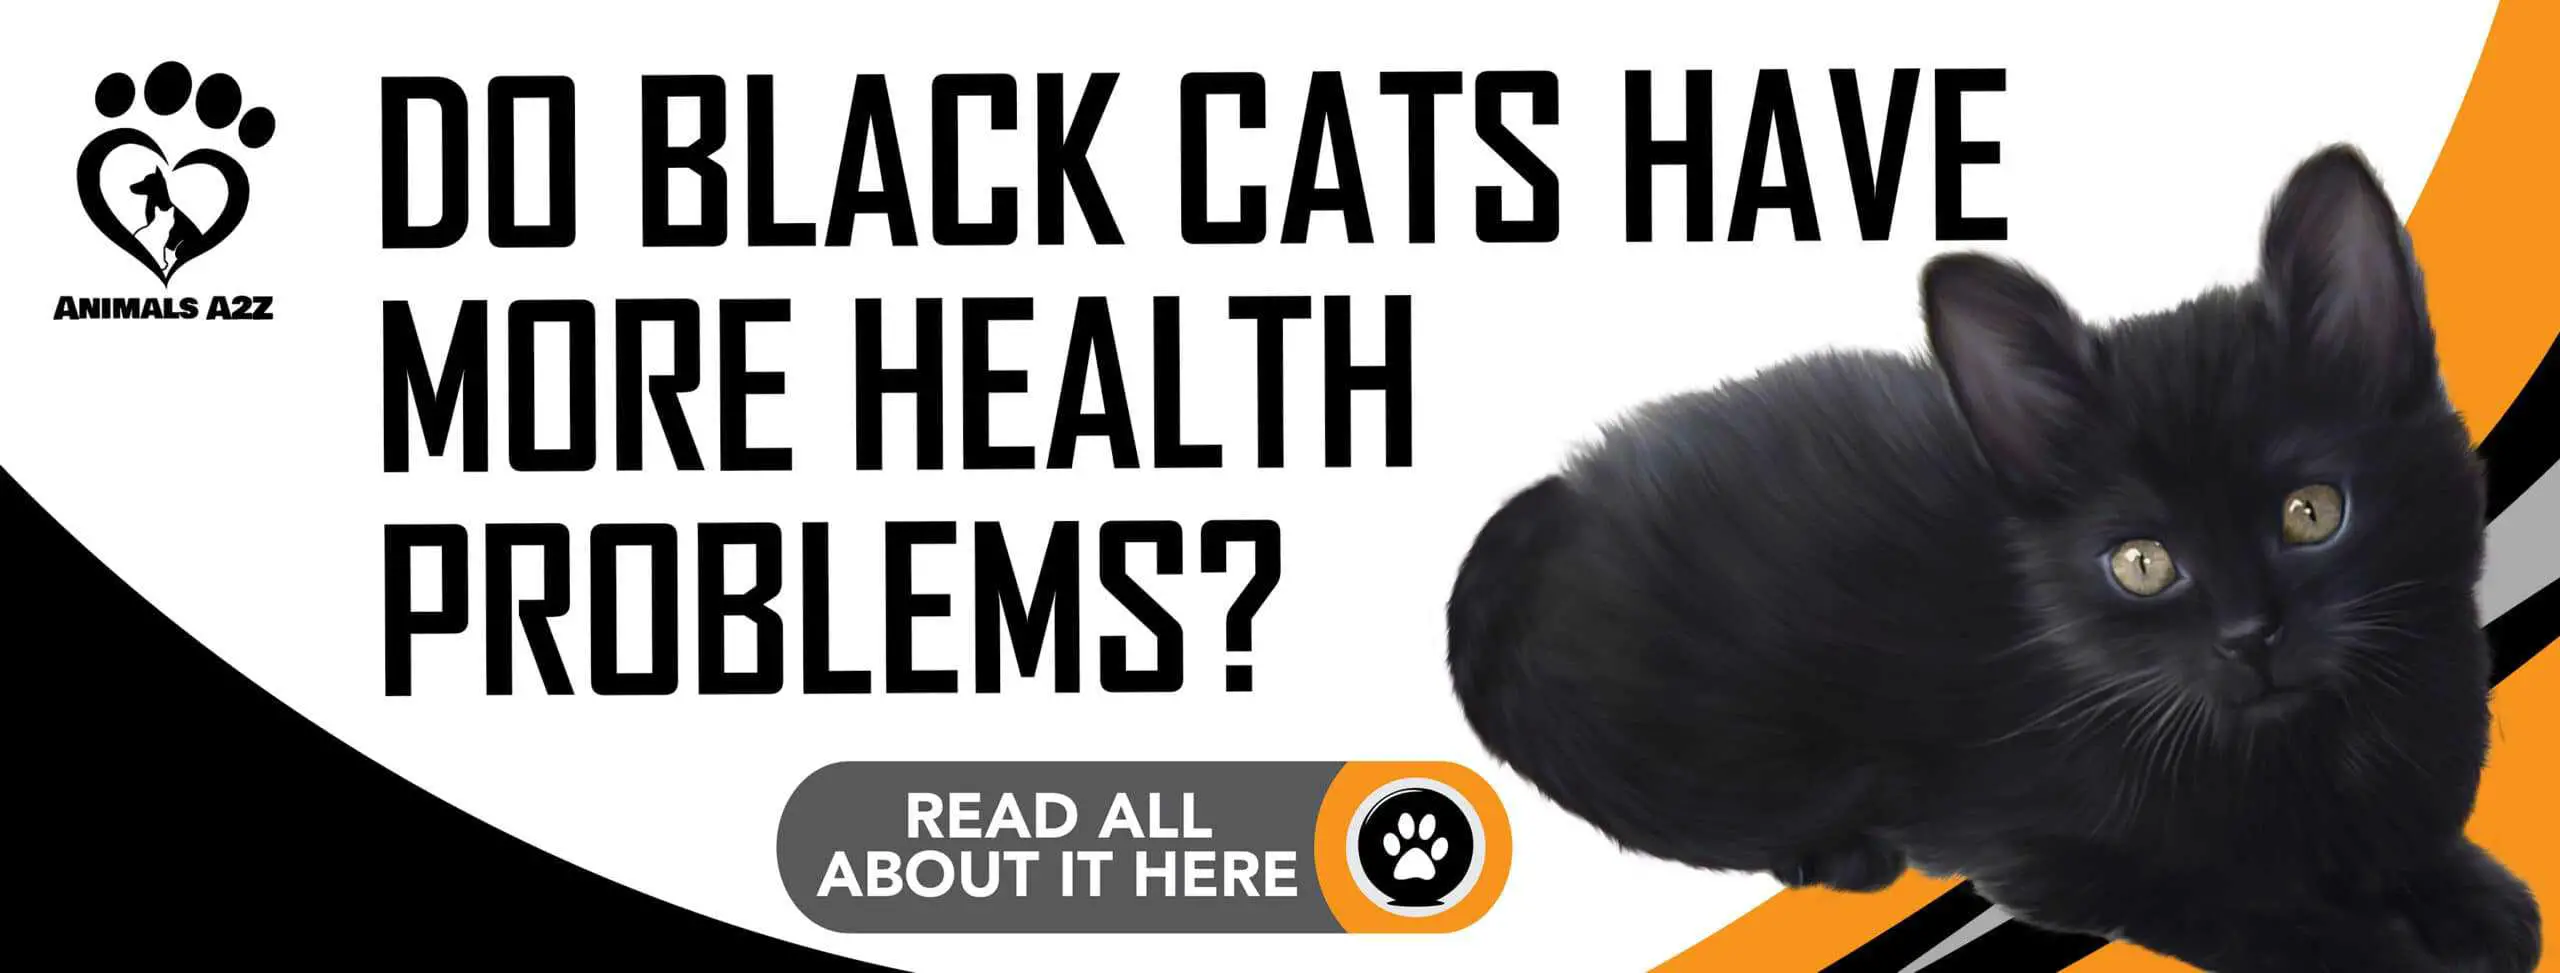 Do black cats have more health problems